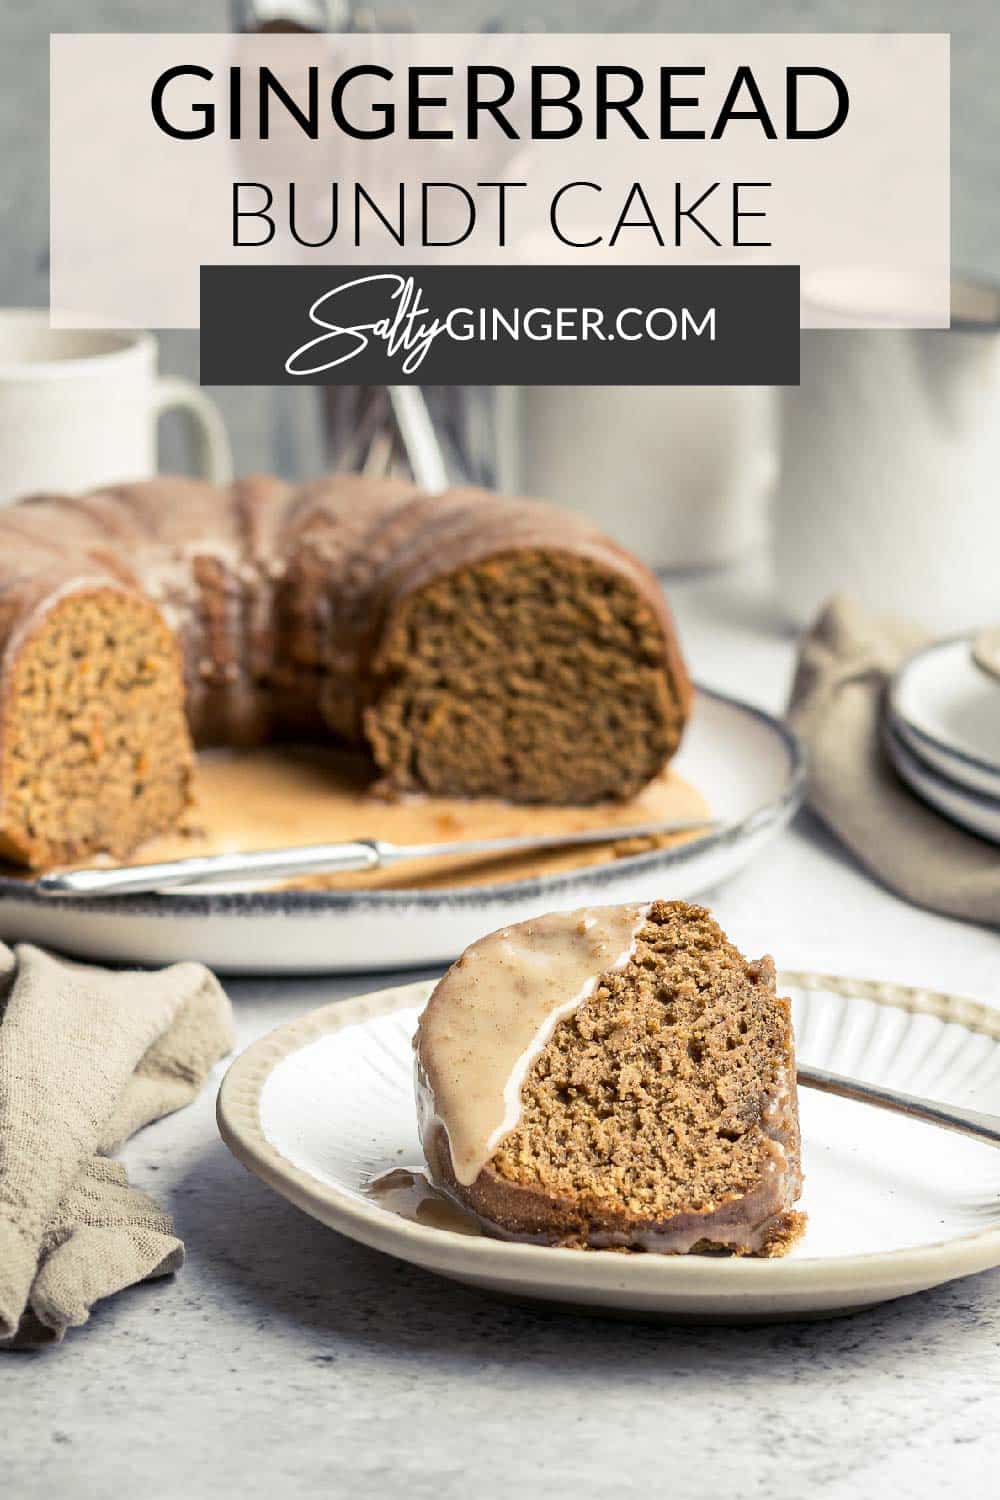 Pin - Slice of gingerbread bundt cake on a plate.